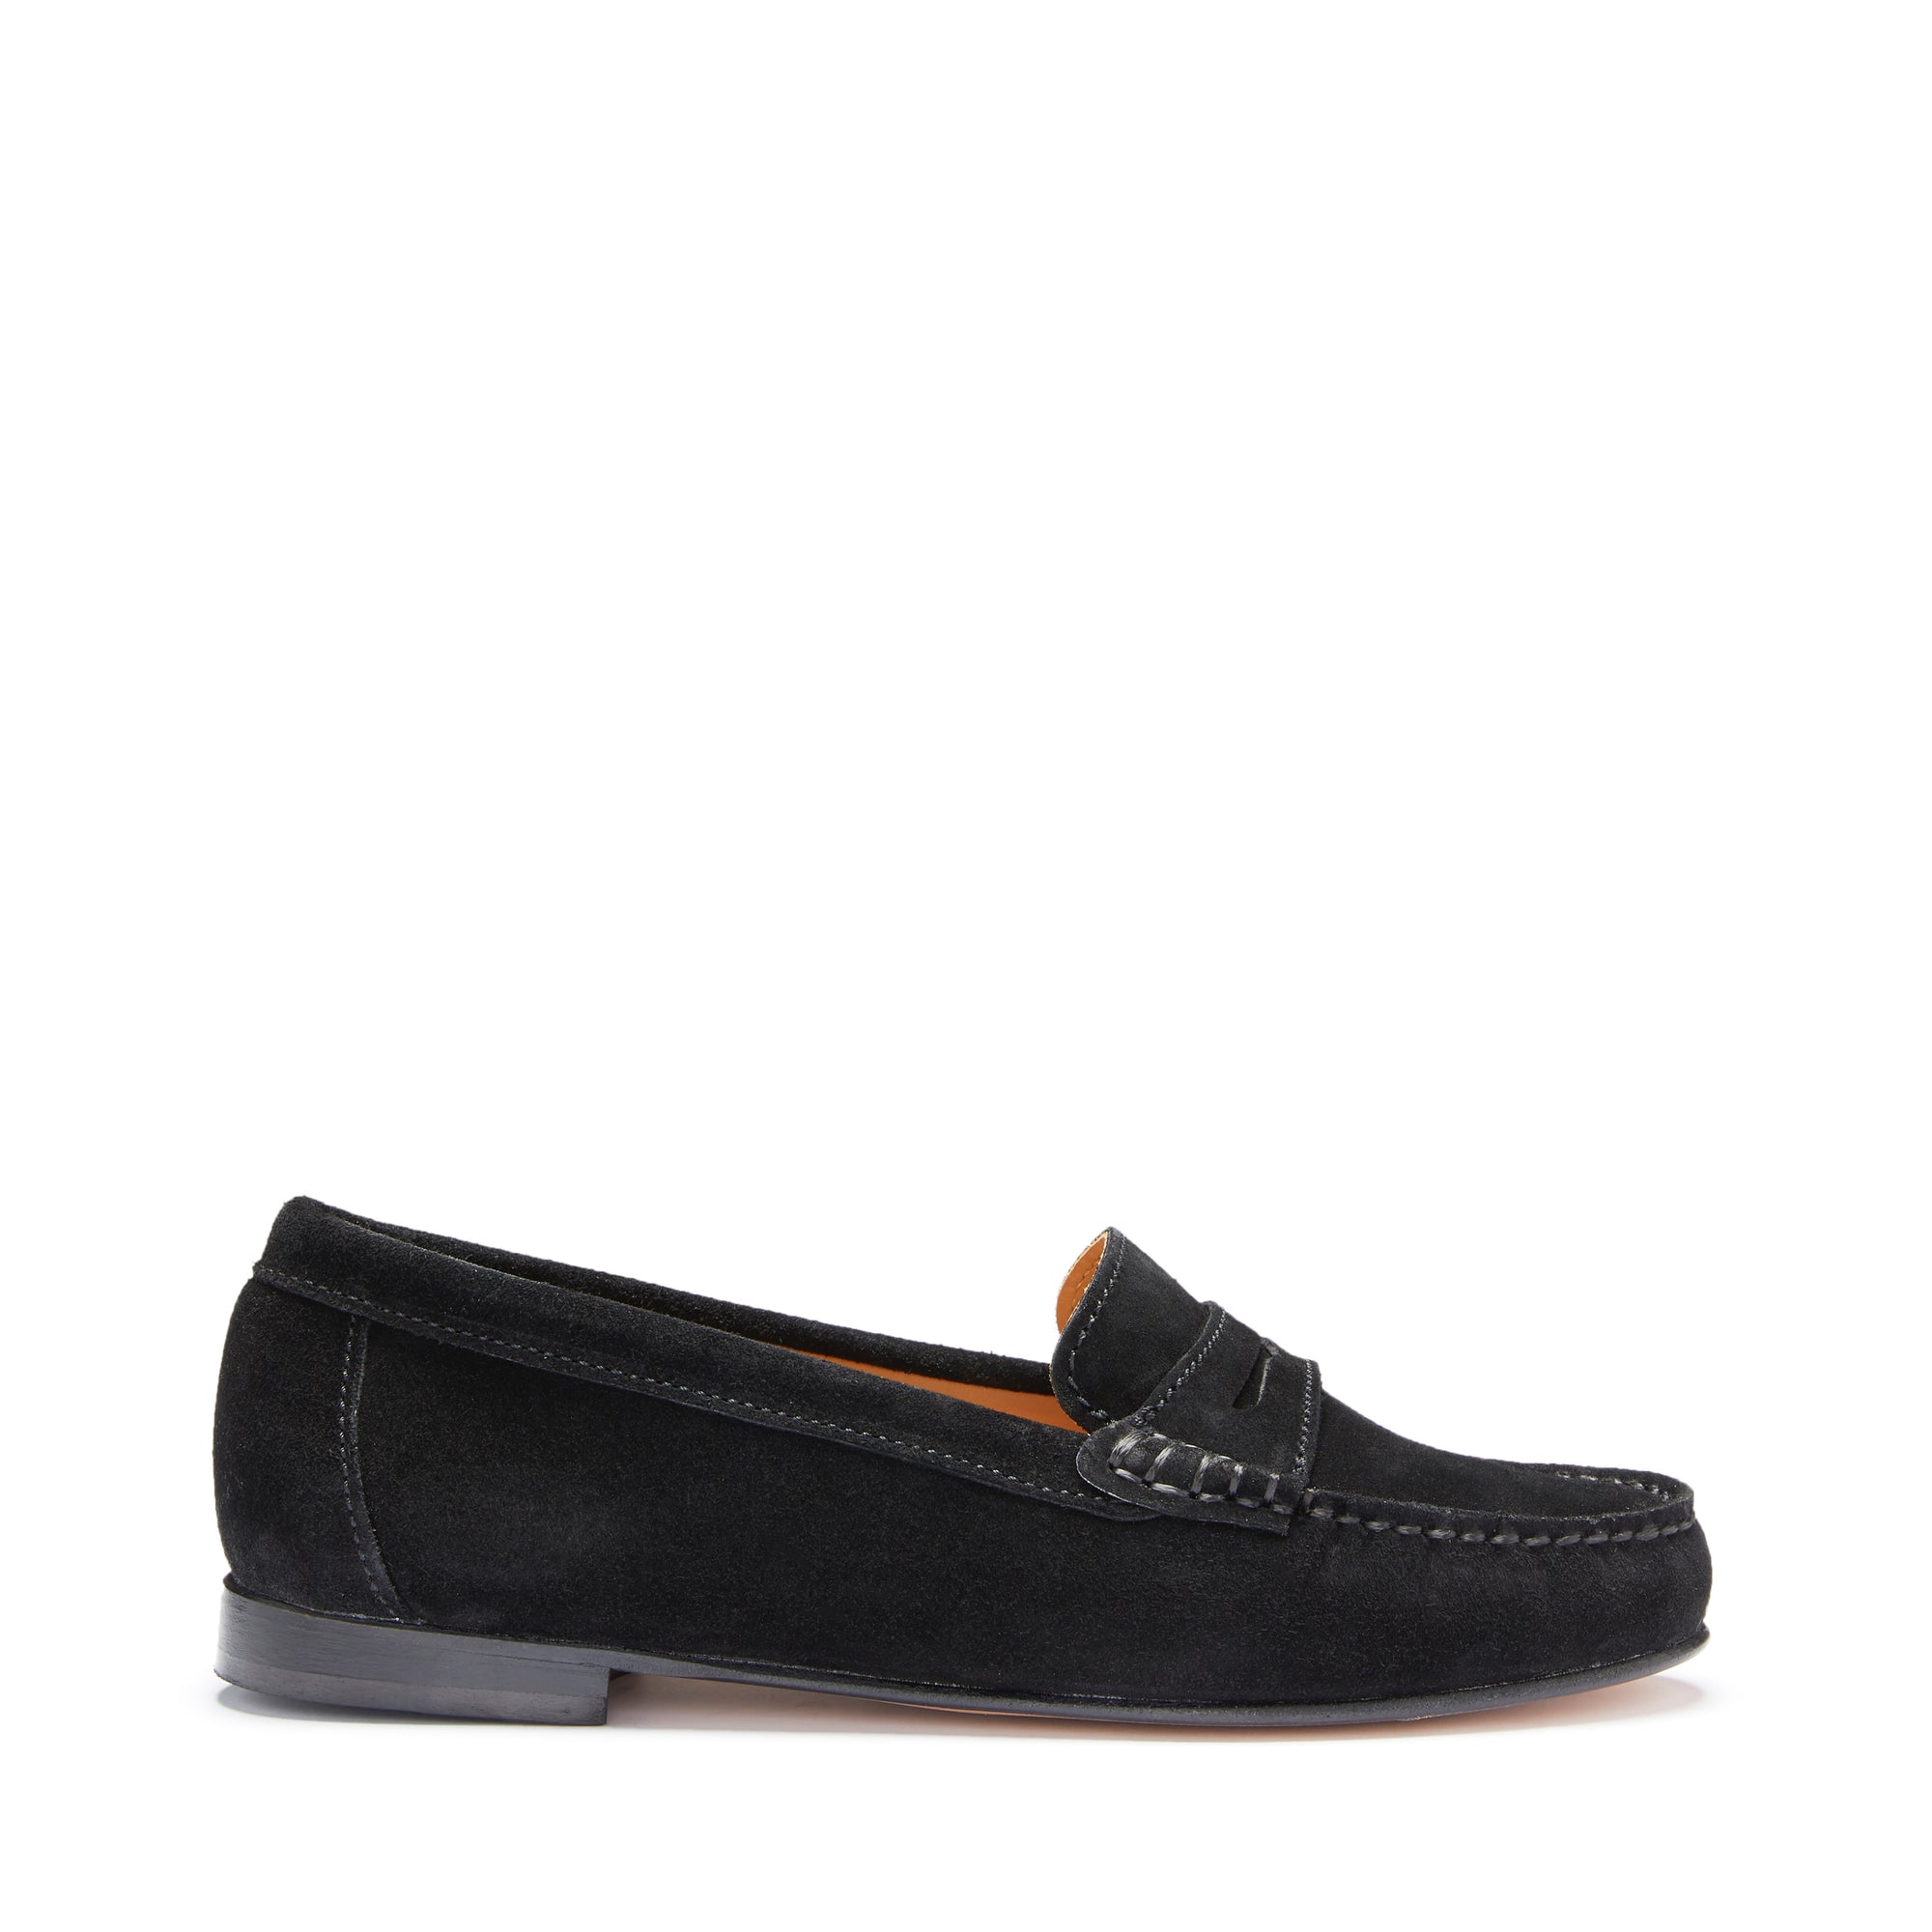 Women's Penny Loafers Leather Sole, black suede